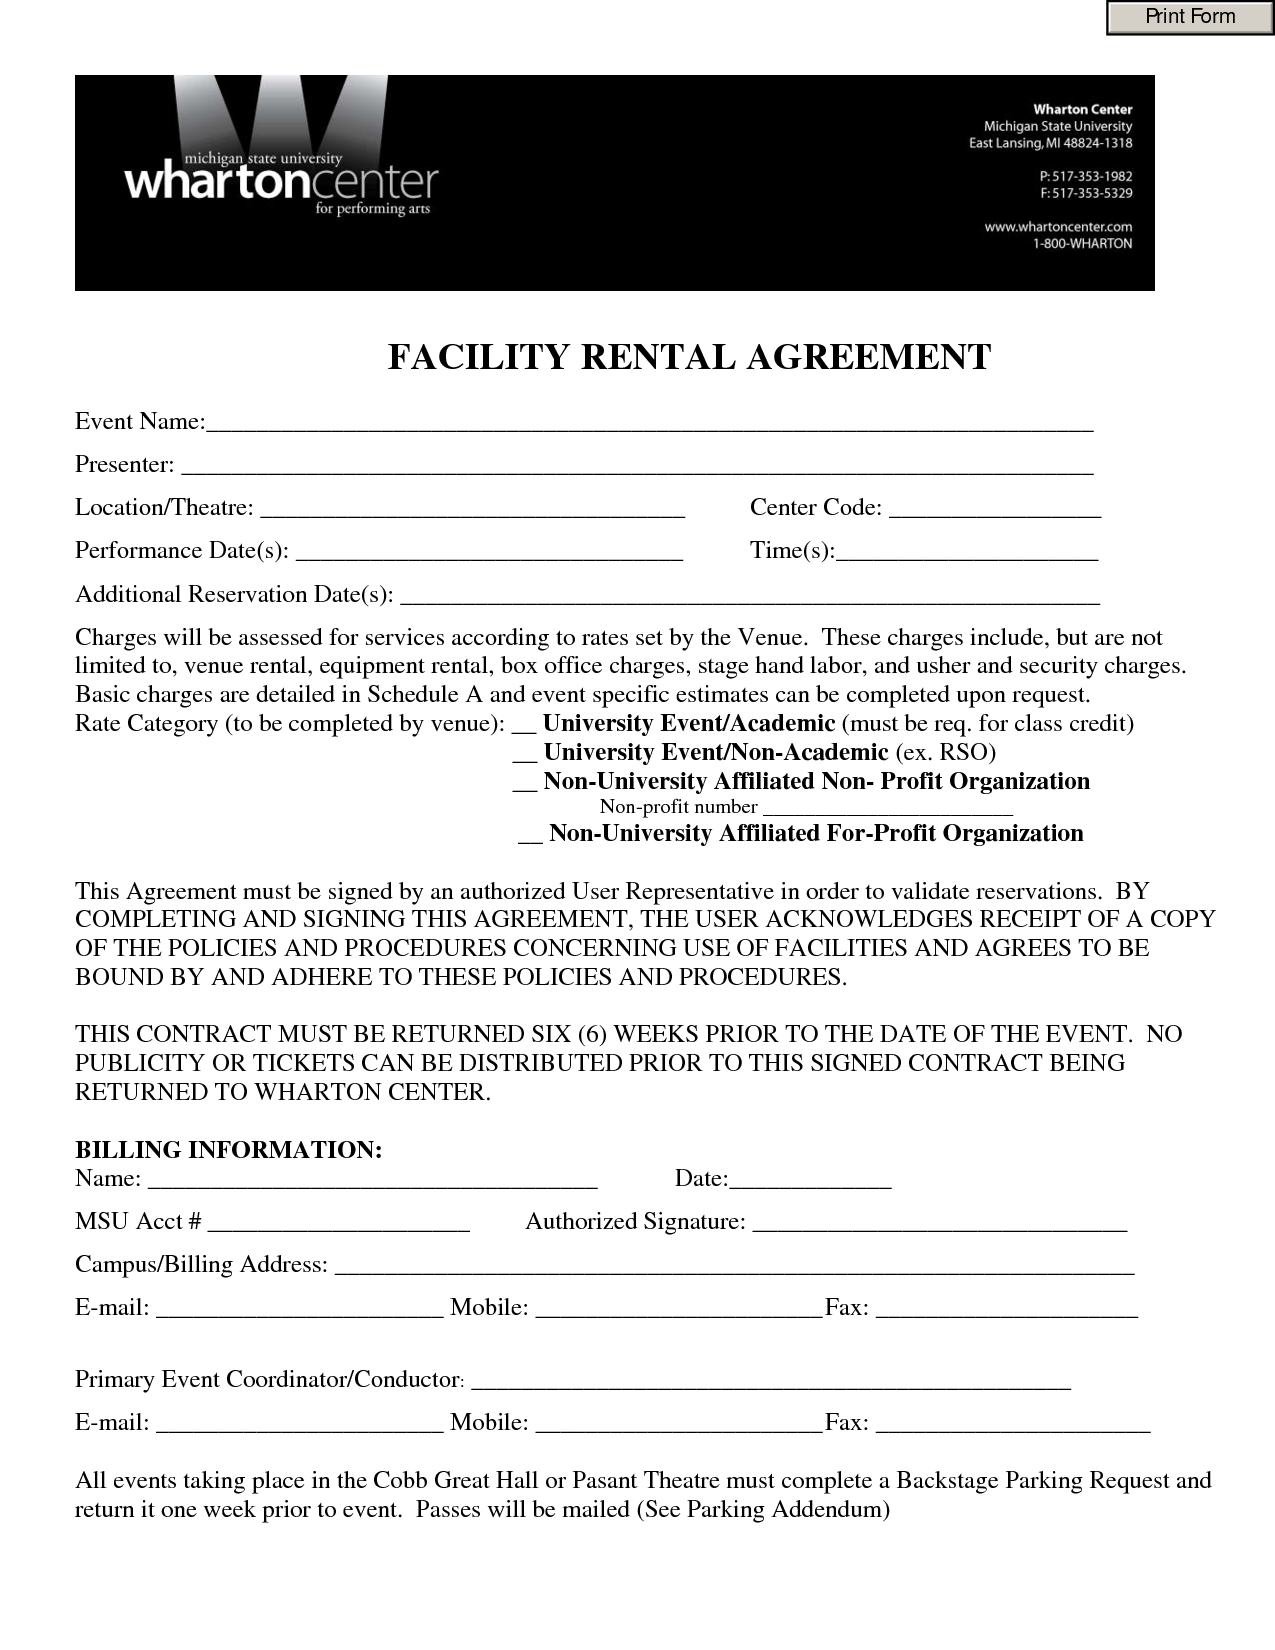 Facility Rental Agreement Form Free Printable Documents